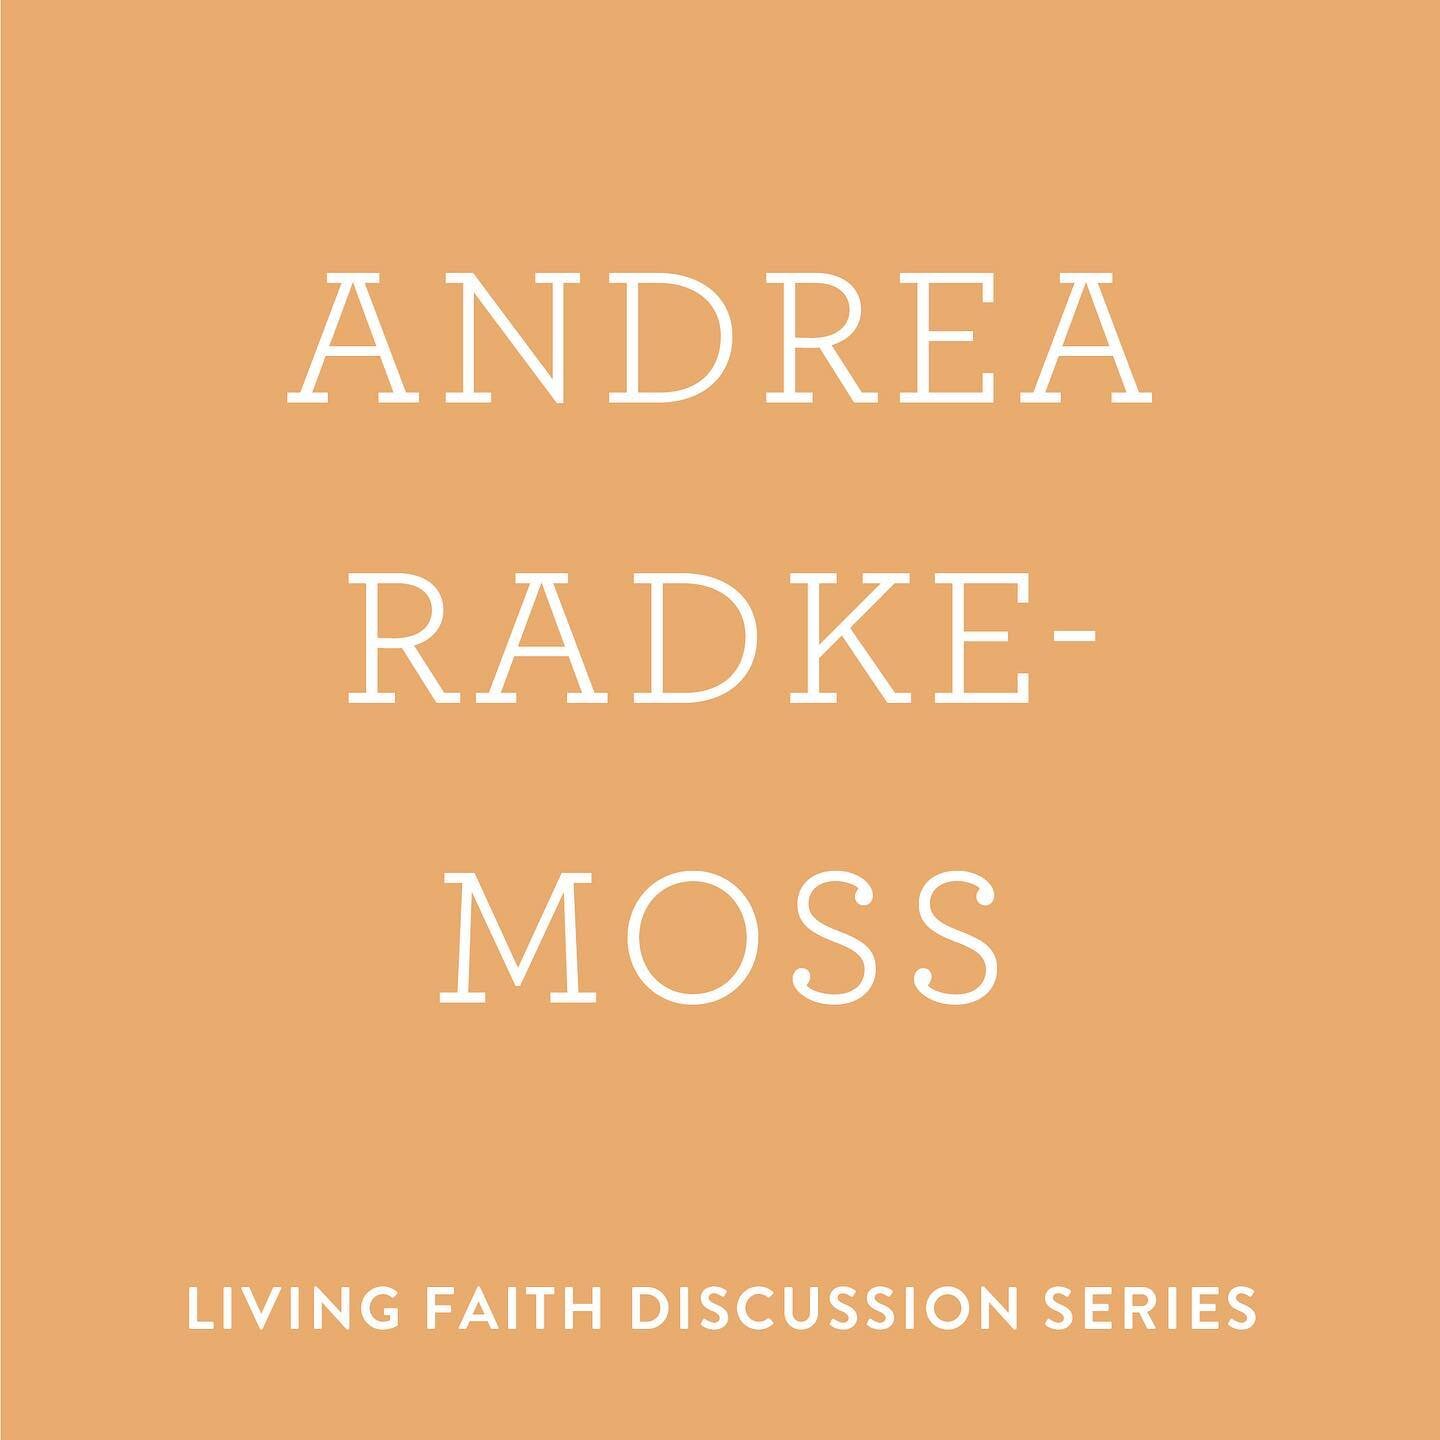 We loved hearing from Professor Andrea Radke-Moss at our Living Faith discussion last Sunday night. Her insights on Liberty Jail and the suffering of women during the Missouri conflict were perfect for our Come, Follow Me lesson this week.

If you mi